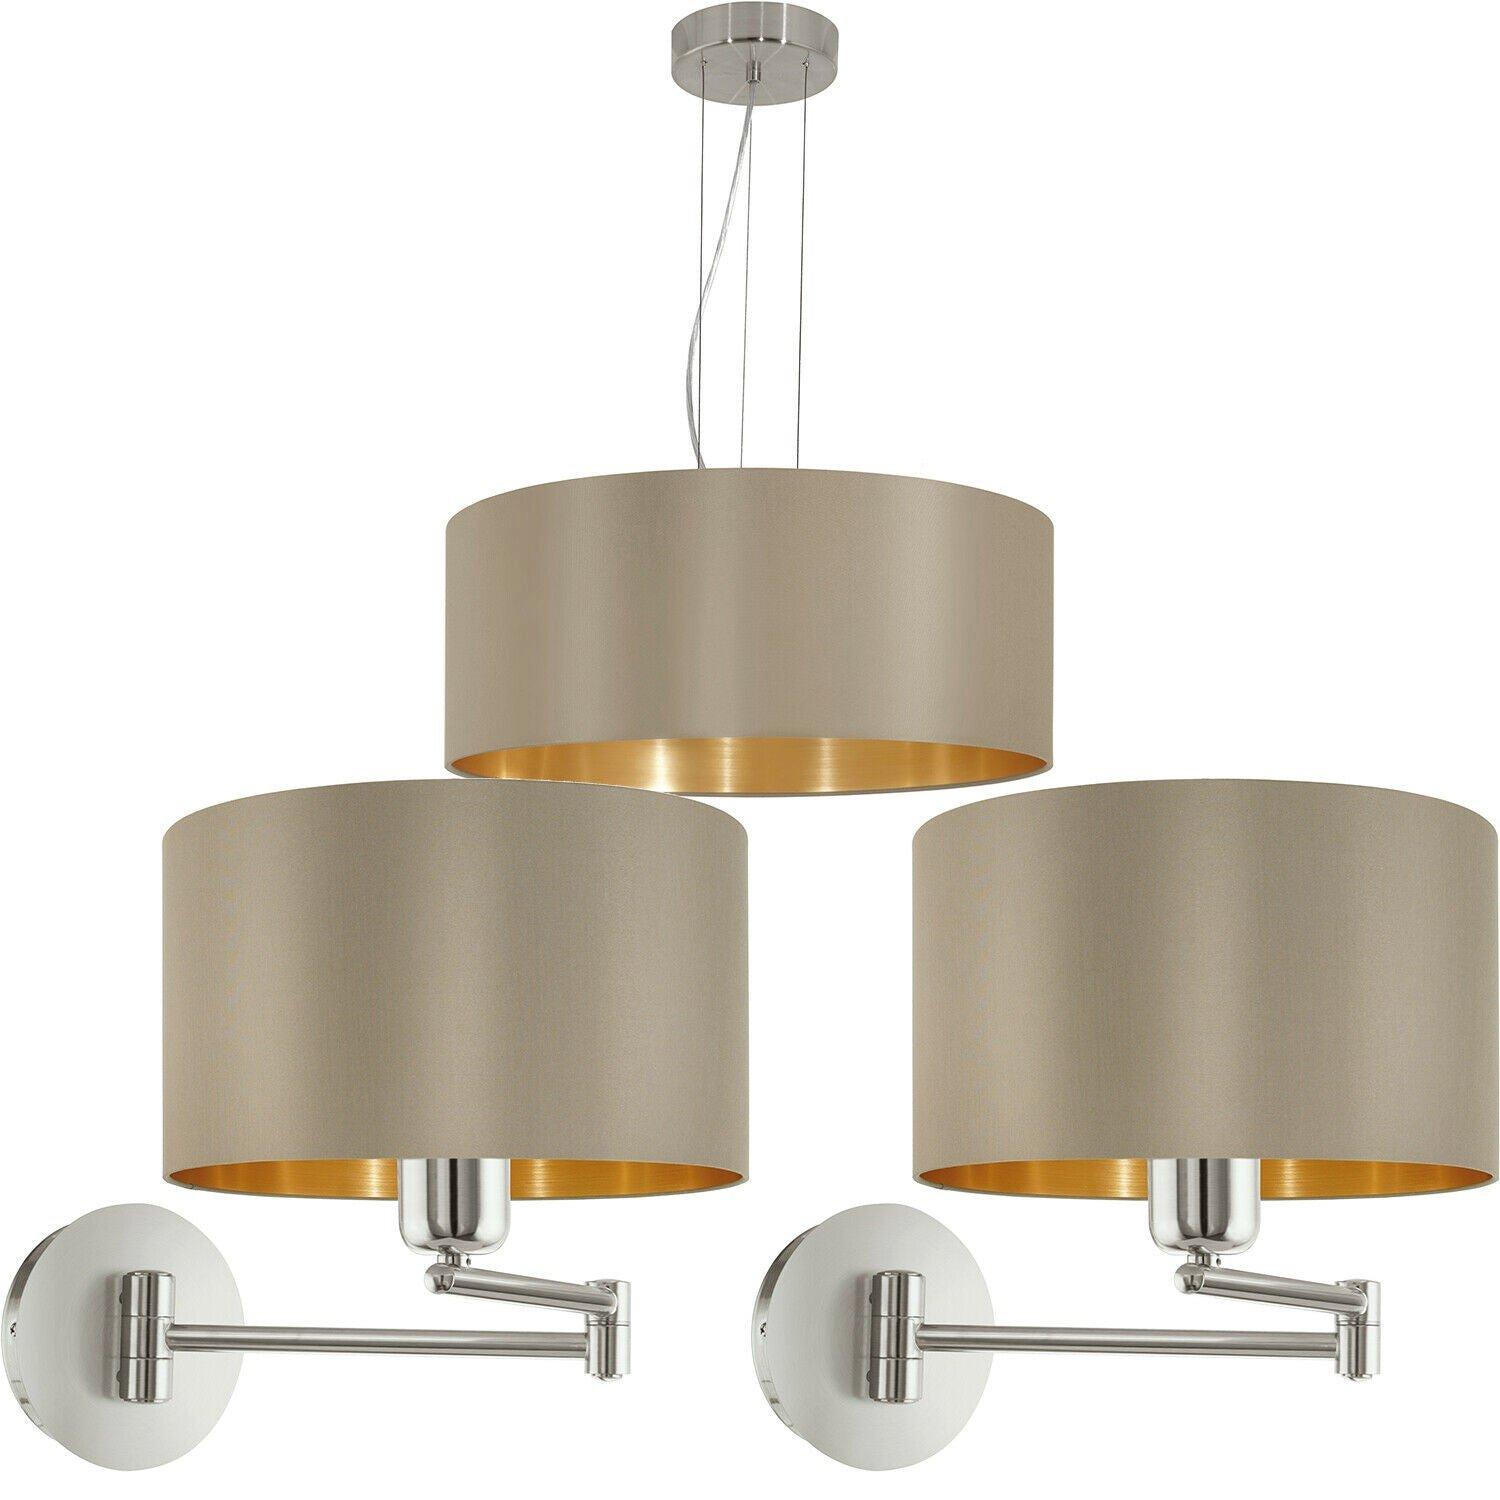 Ceiling Pendant Light & 2x Matching Wall Lights Taupe Gold Fabric Feature Lamp